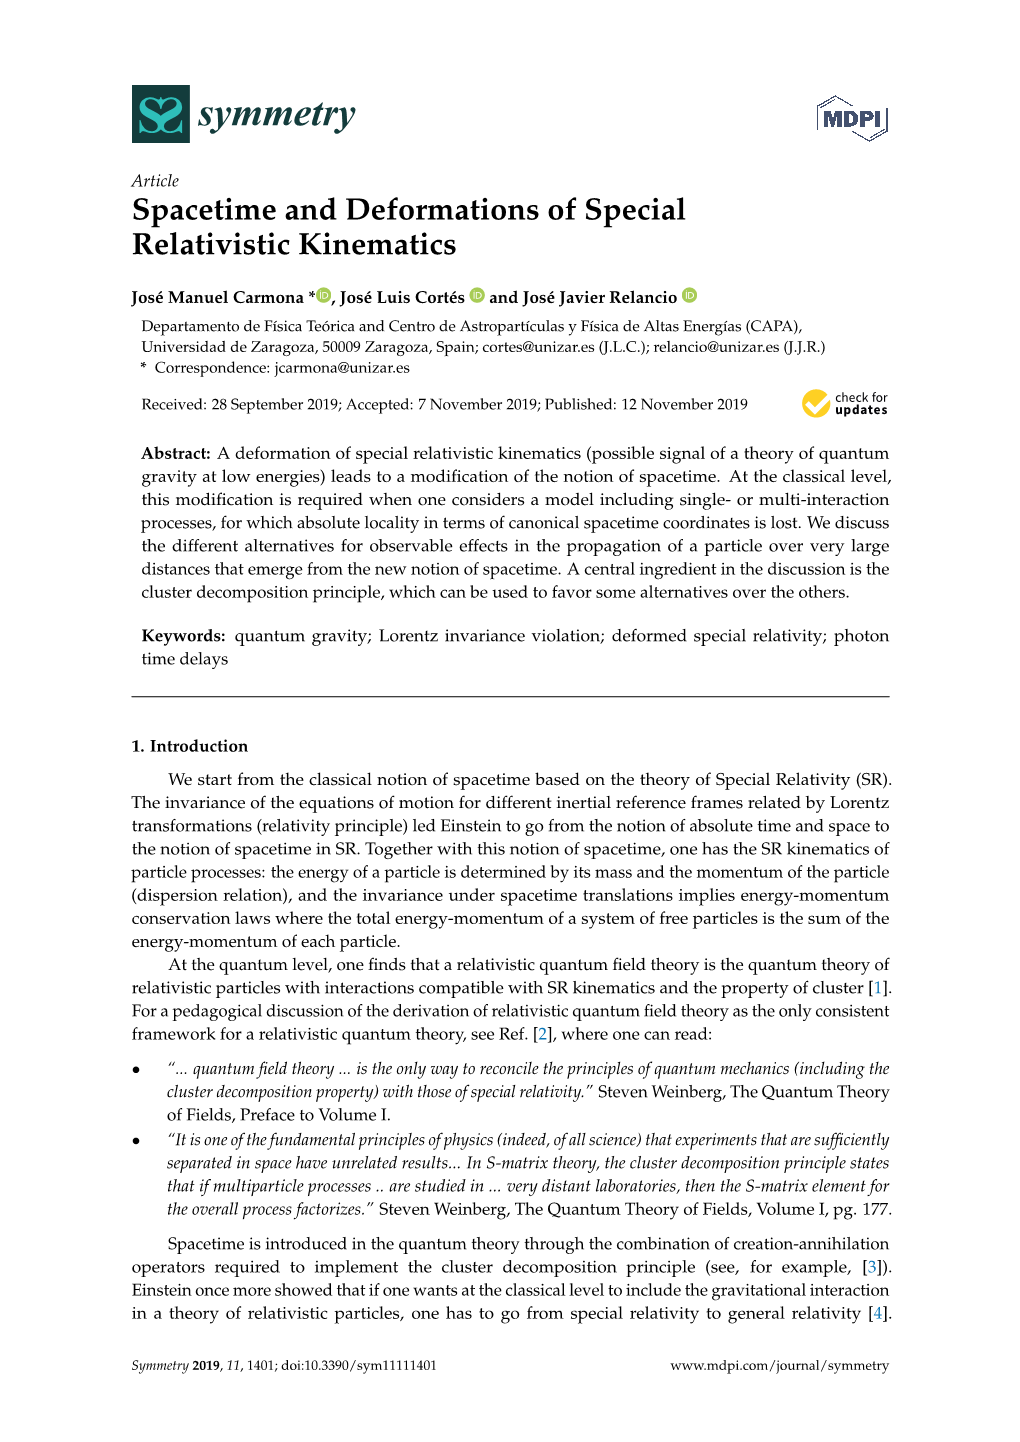 Spacetime and Deformations of Special Relativistic Kinematics